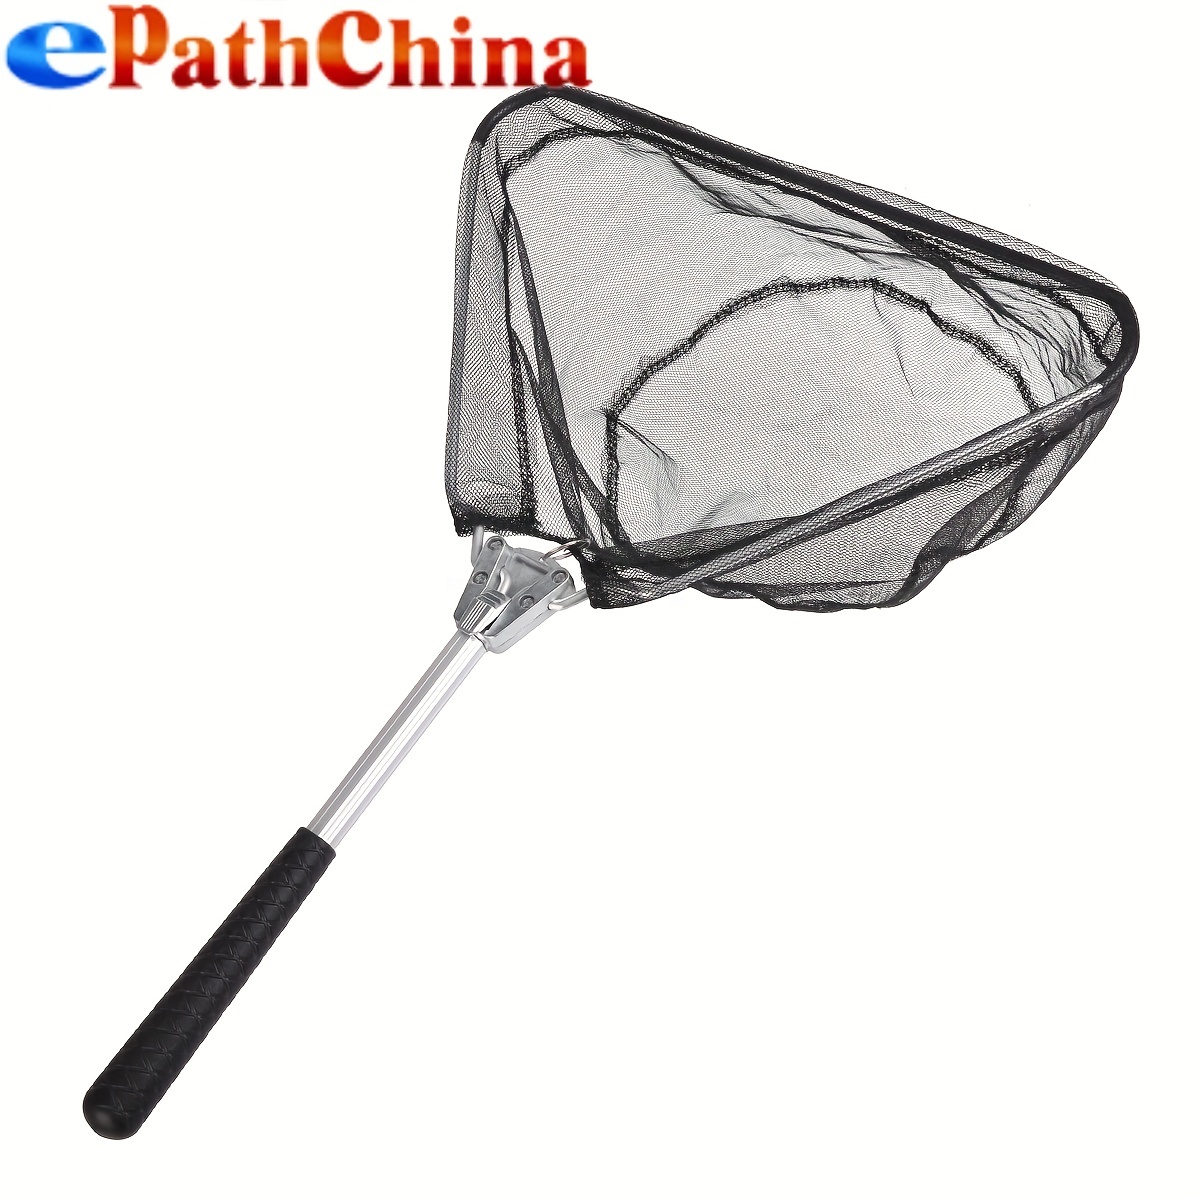 

1pc Fishing Net With Folding Aluminum Alloy Pole (50cm/19.69in), Durable Fly Fishing Landing Net, Fishing Tackle